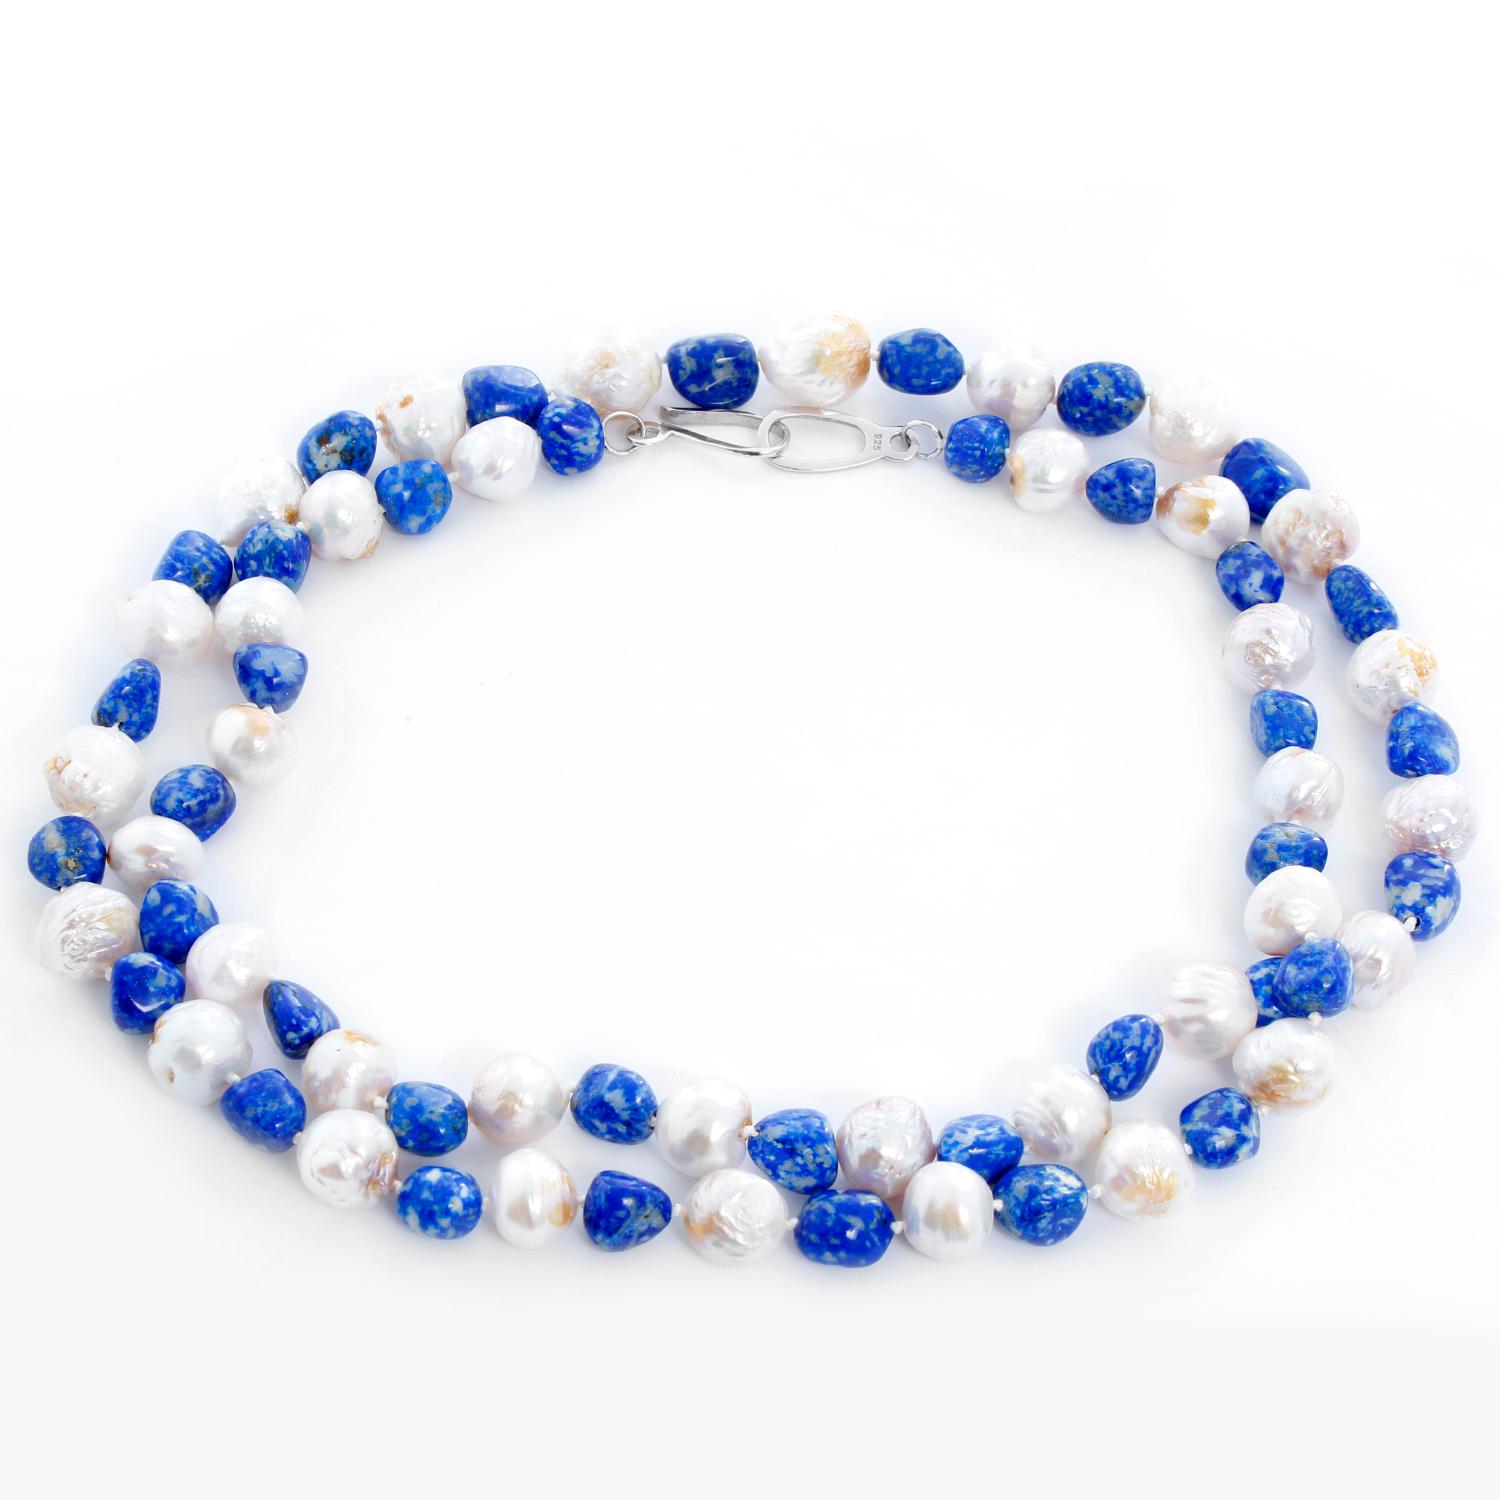 Men's Baroque Pearl and Lapis Lazuli Necklace